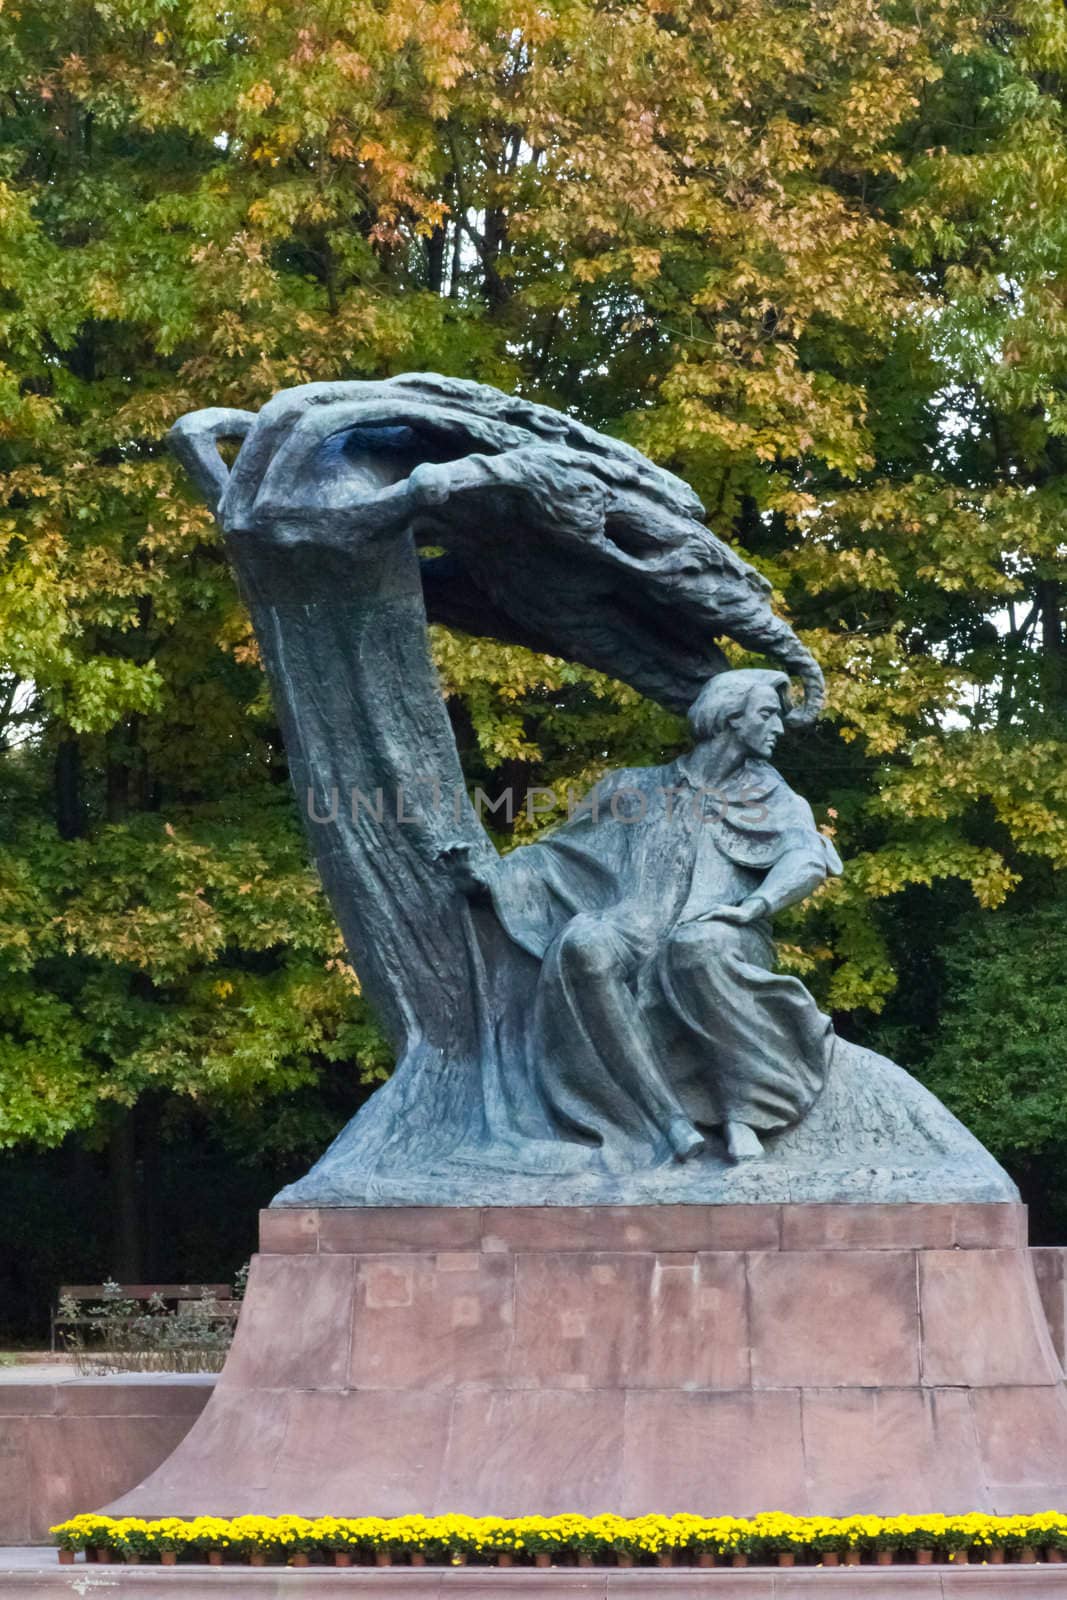 A statue of Frederic Chopin, the polish composer, in a park in Warsaw, Poland